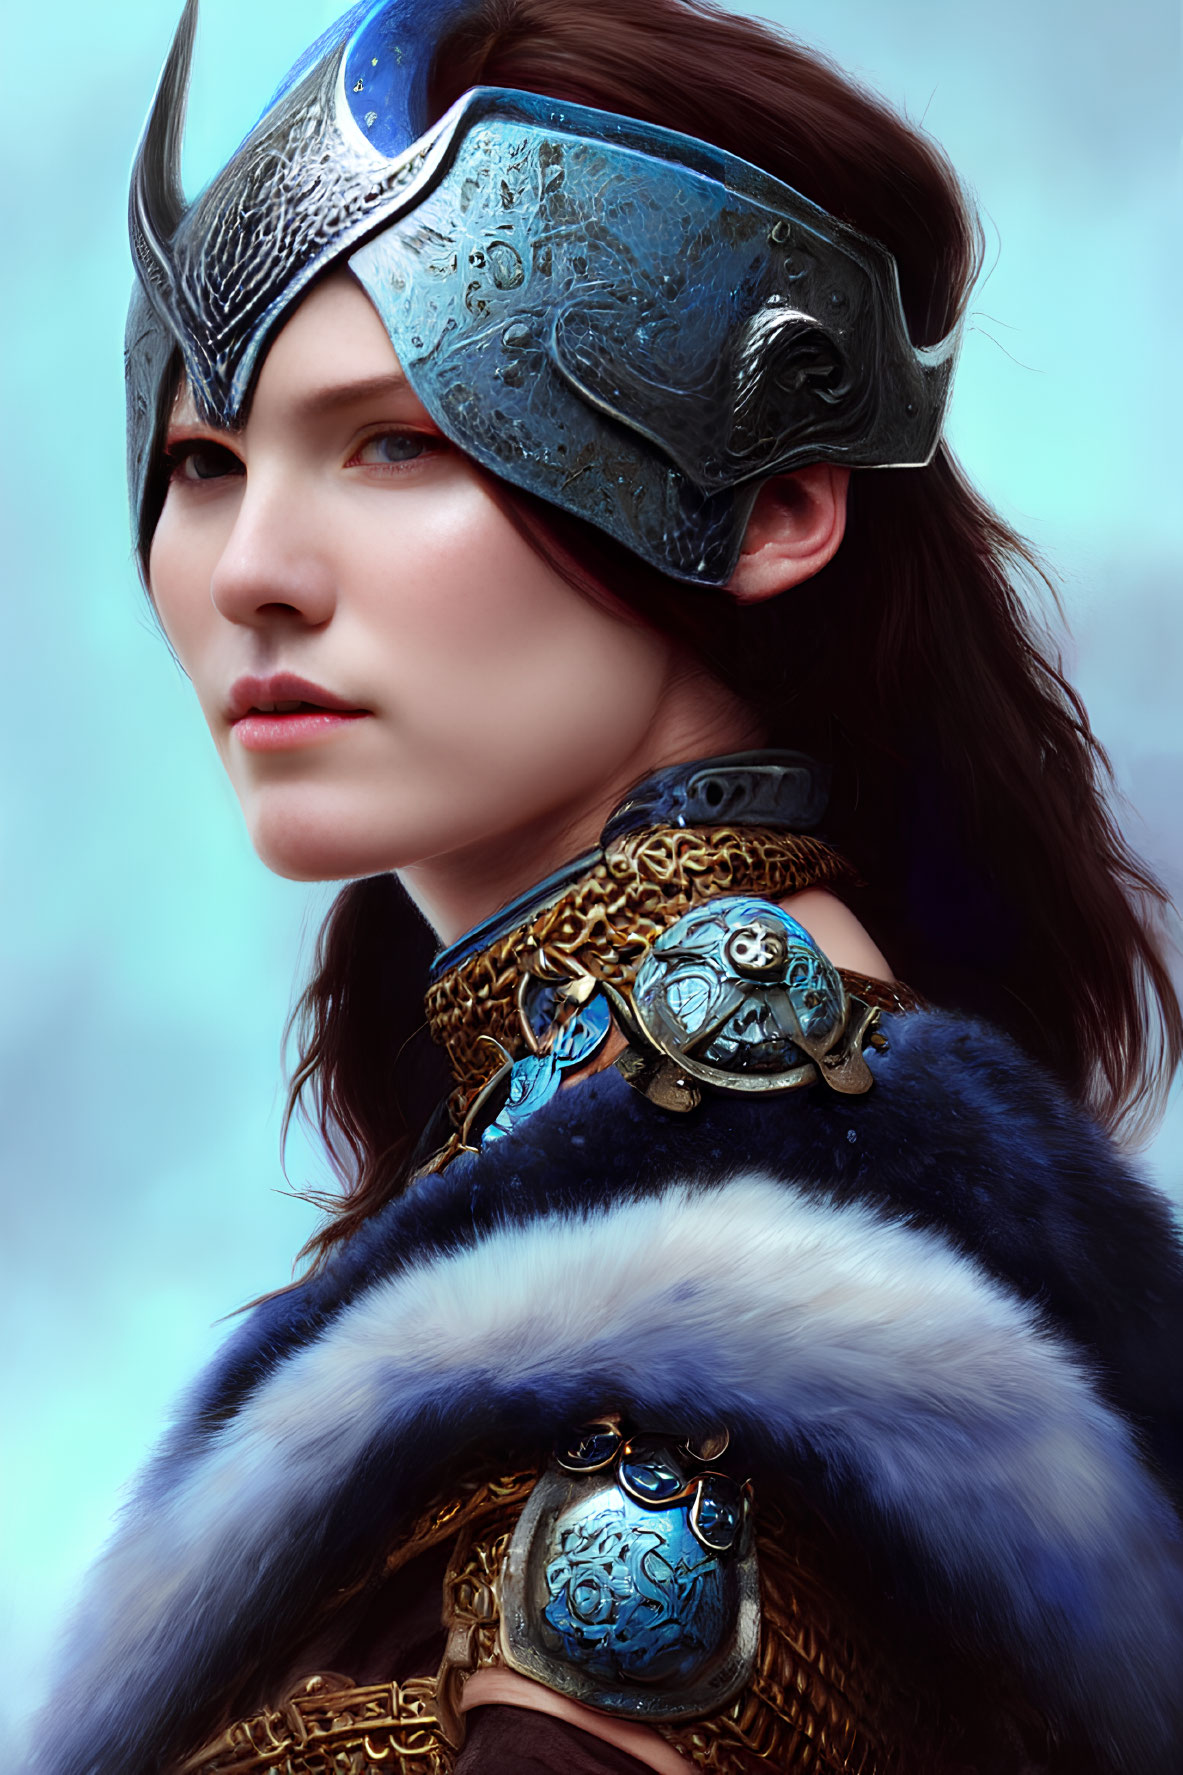 Fantasy portrait of woman in metallic helmet and ornate armor with fur cloak on blue background